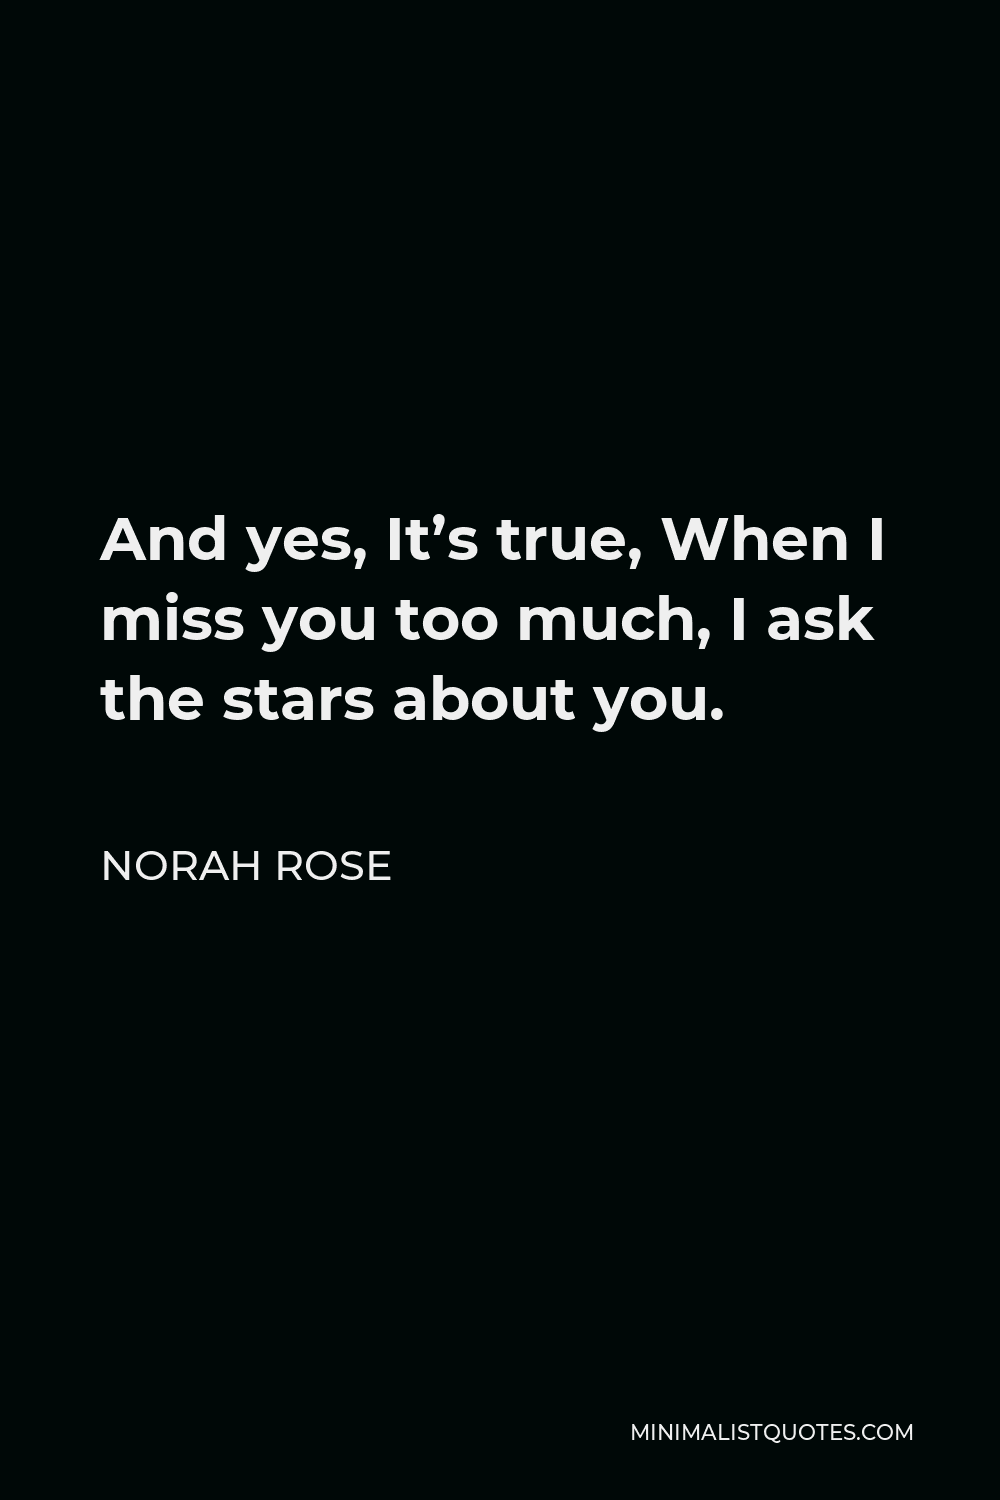 Norah Rose Quote: And yes, It's true, When I miss you too much, I ...